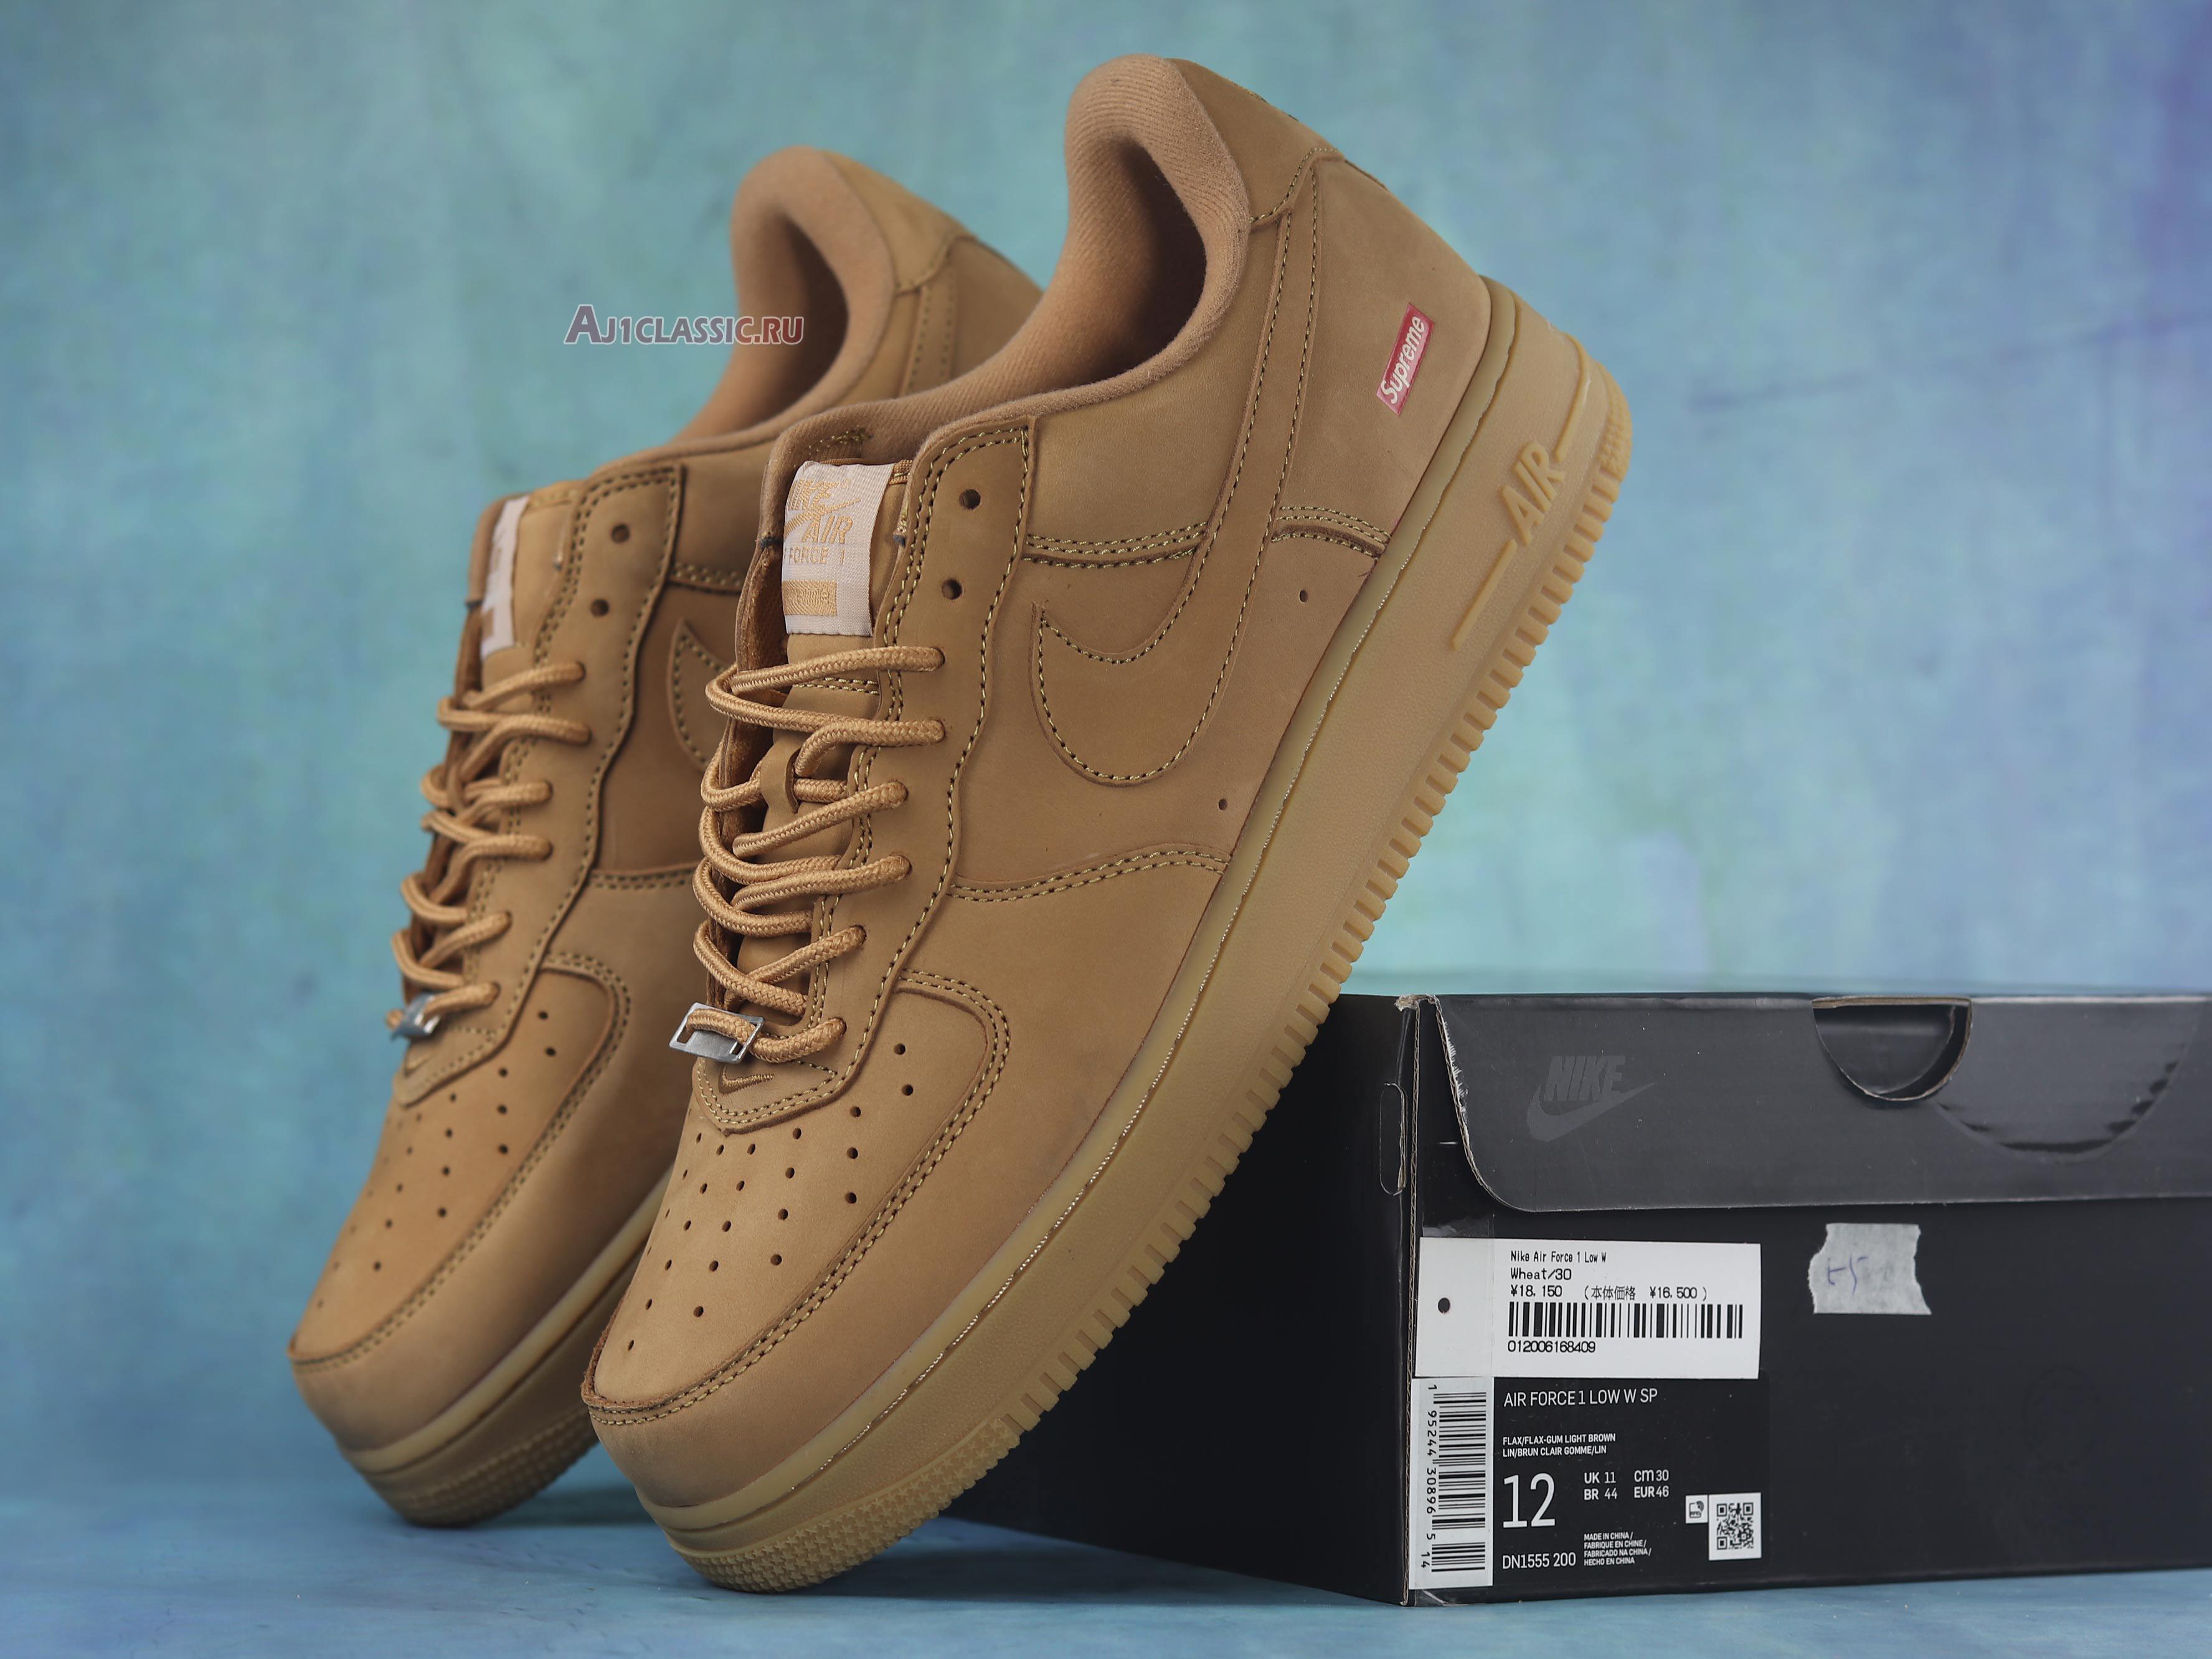 Supreme x Nike Air Force 1 Low SP "Wheat" DN1555-200